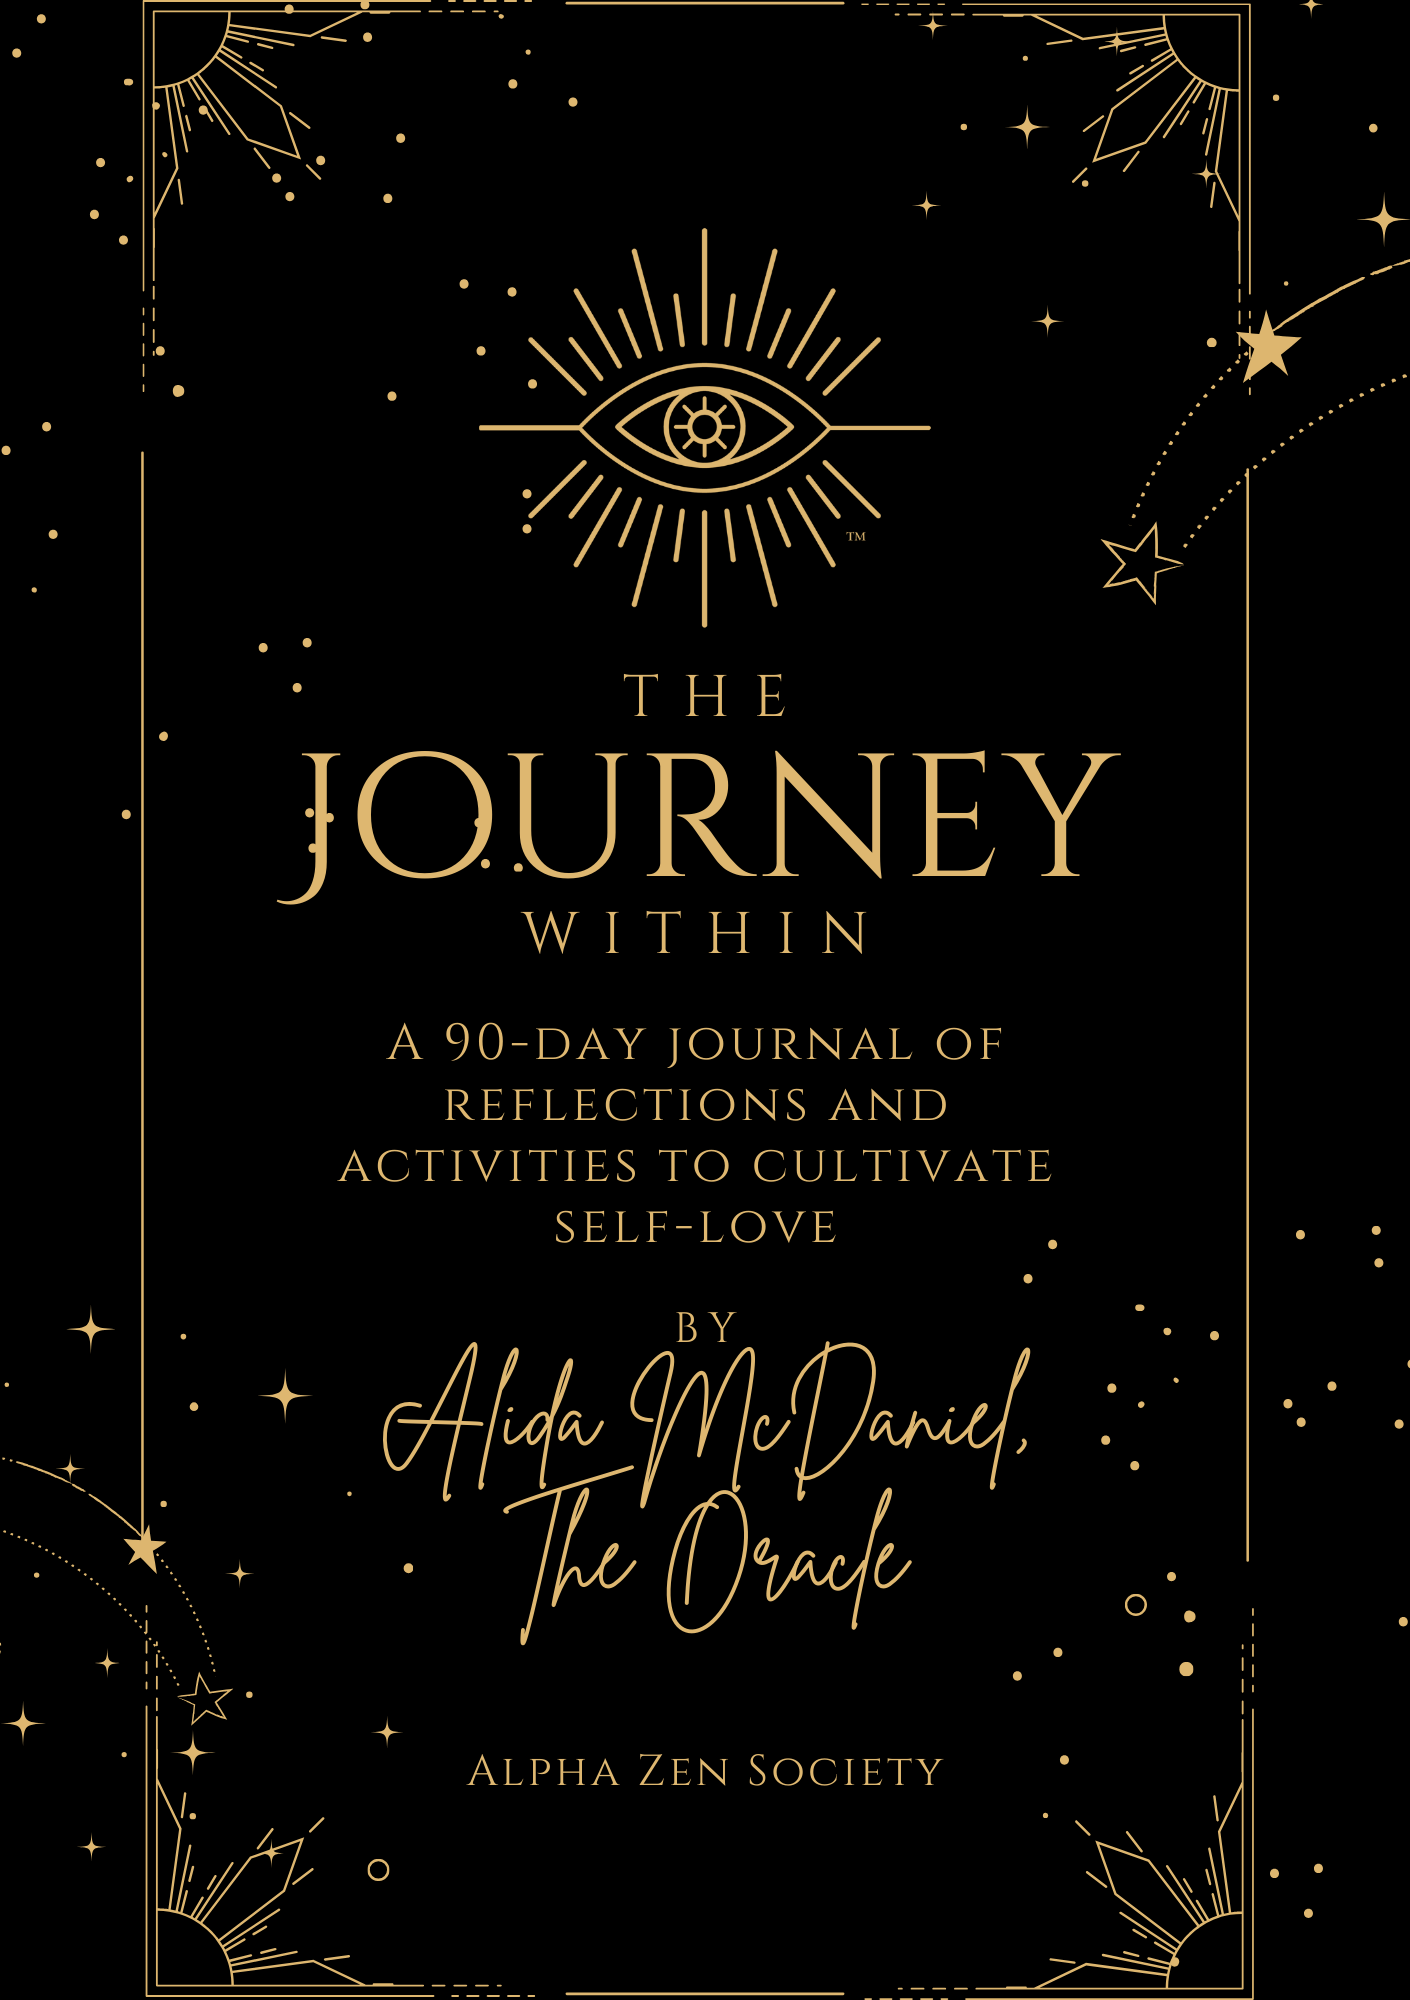 The Journey Within: A 90-day PDF journal of reflections and activities to cultivate self-love